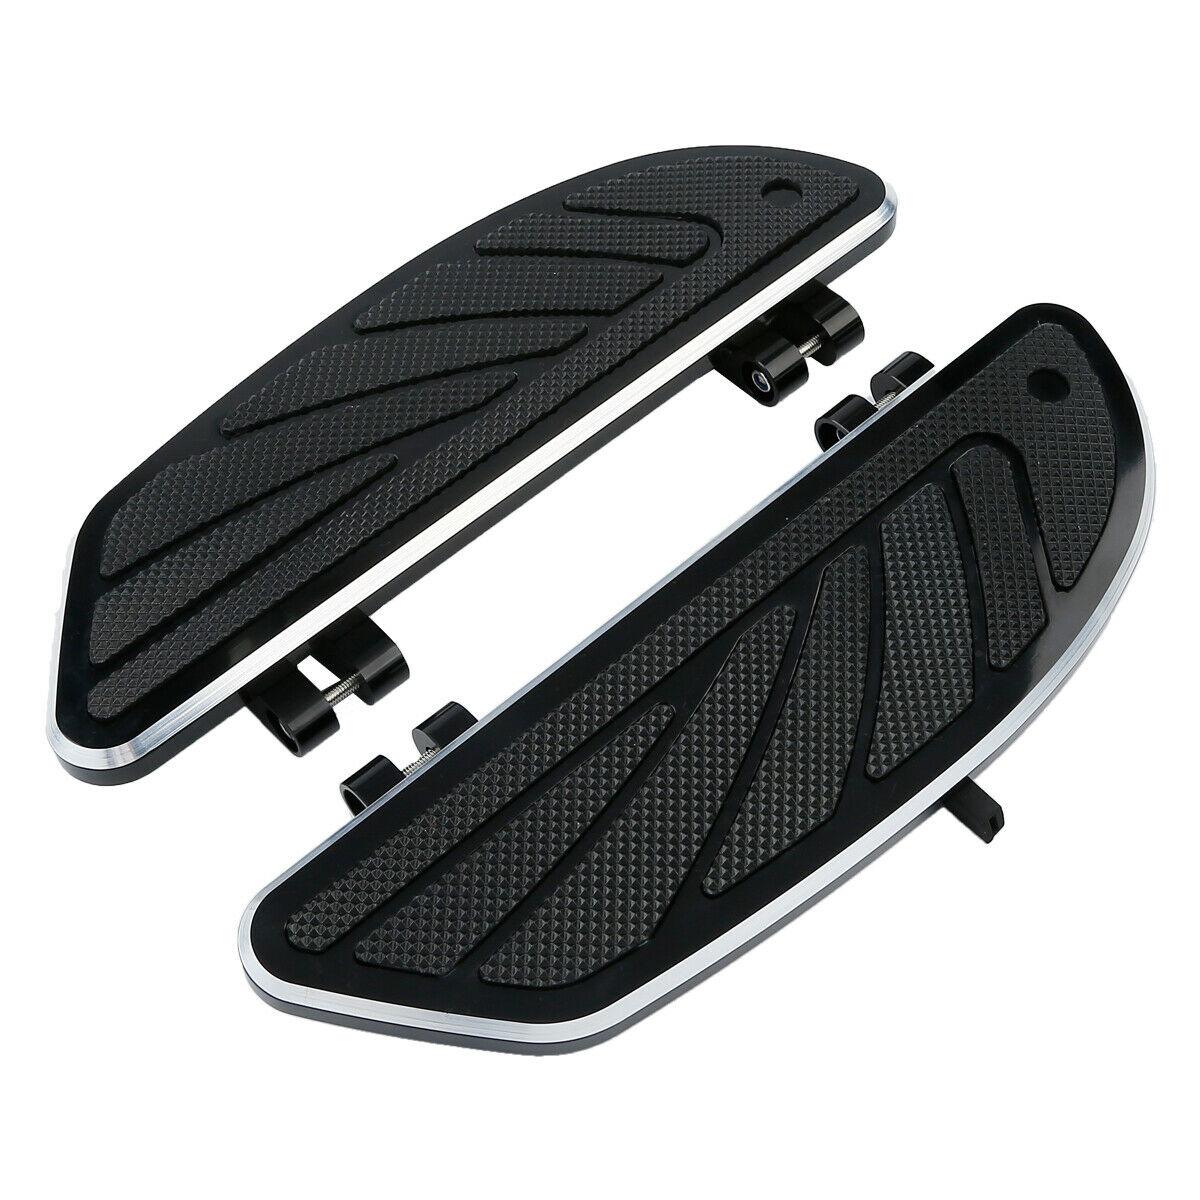 Airflow Rider Footboard Floorboard Fit For Harley Touring Road King 1986-2022 - Moto Life Products